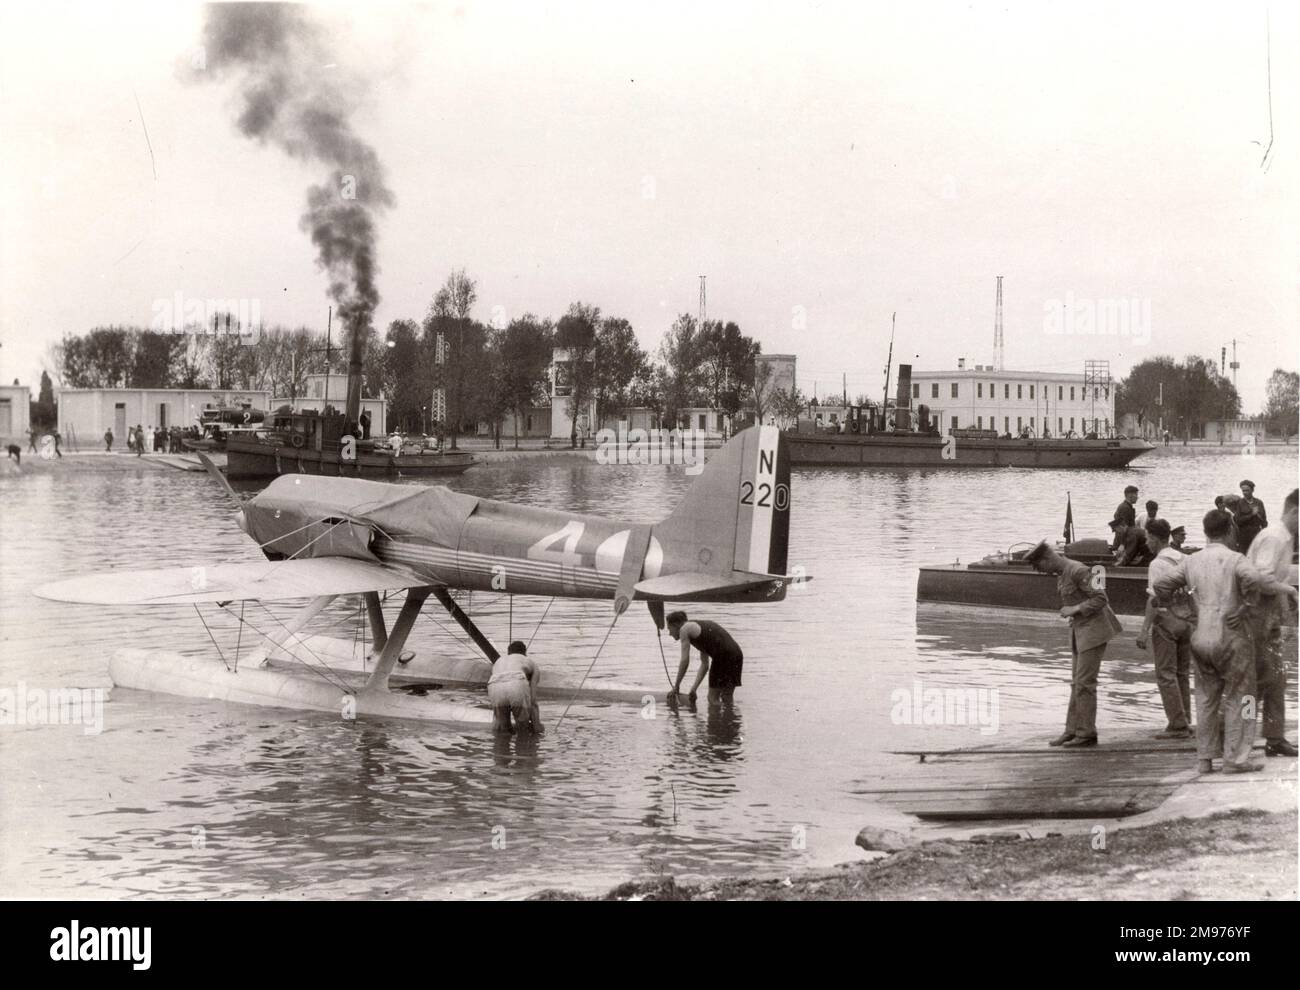 Supermarine S5, N220, is launched at Venice on 26 September 1927. Stock Photo